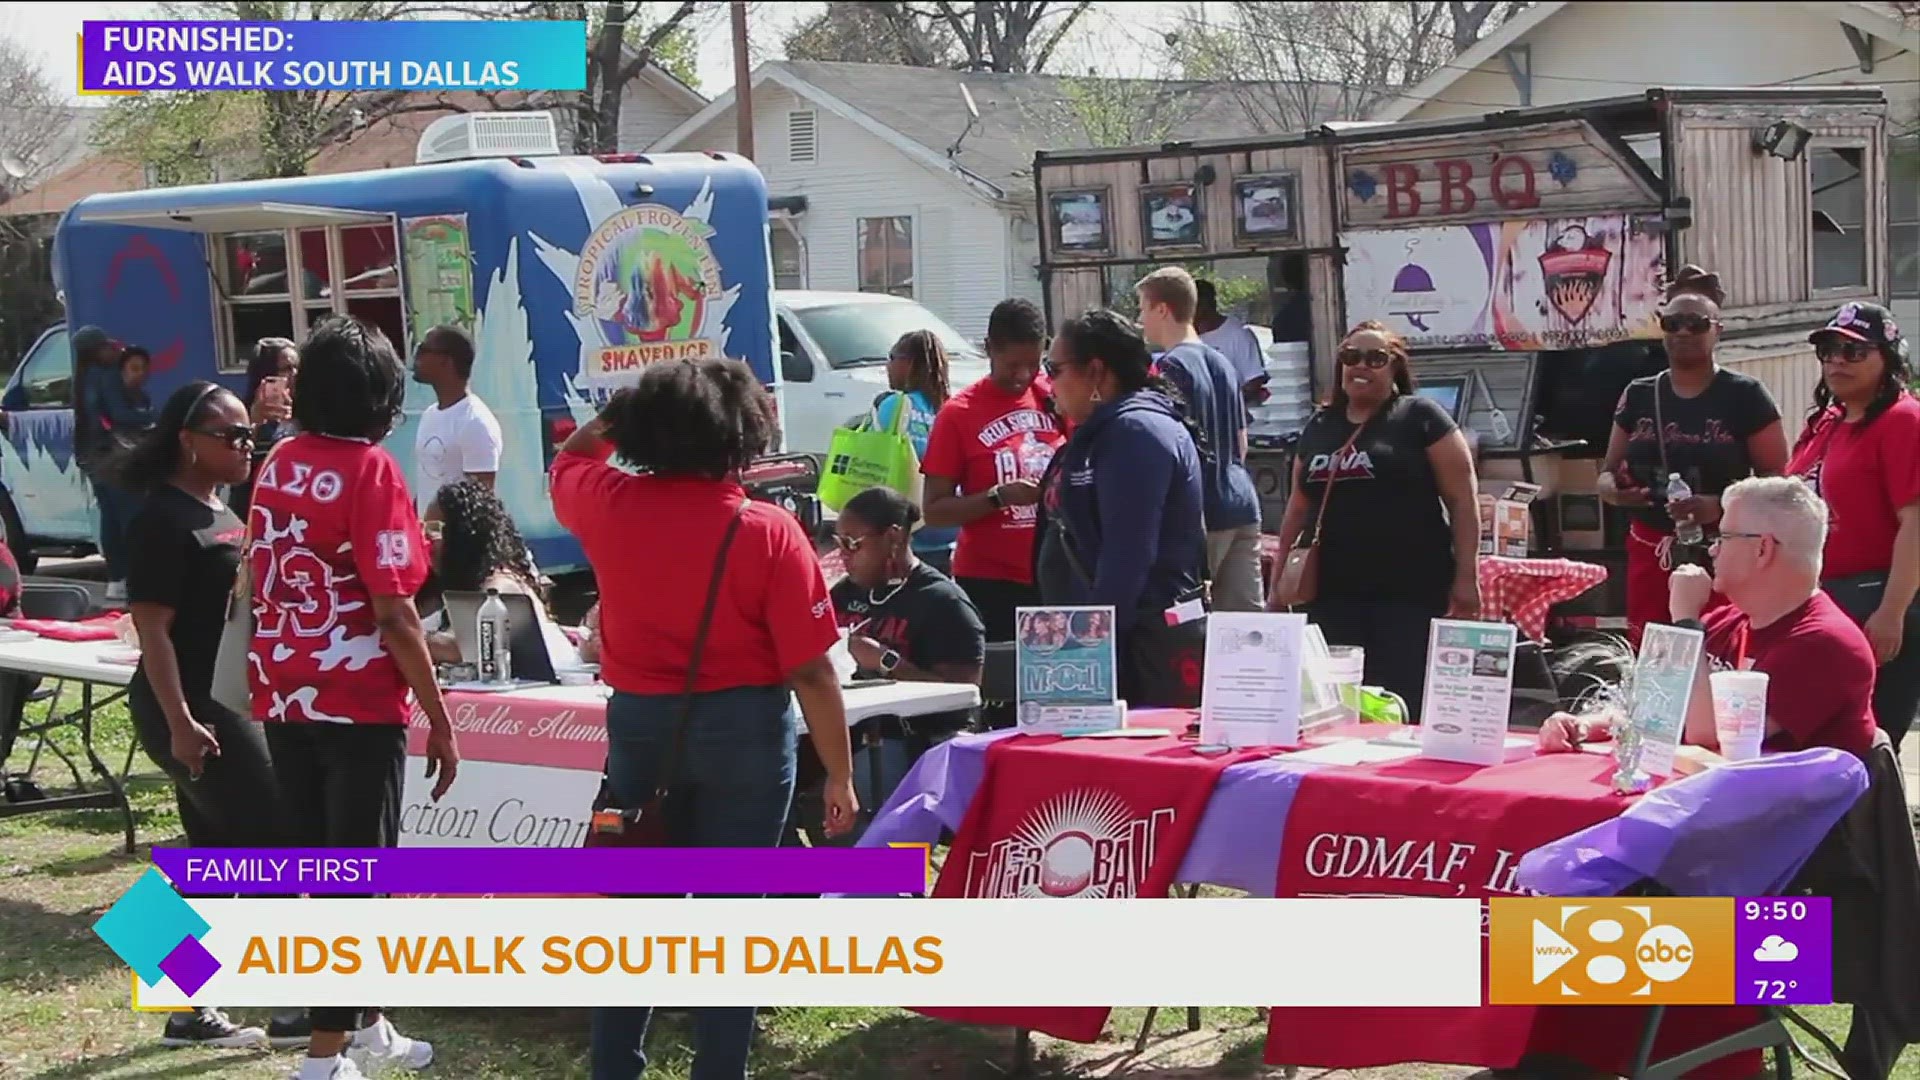 We find out what you can expect at Aids Walk South Dallas. Go to aidswalksouthdallas.com for more information.